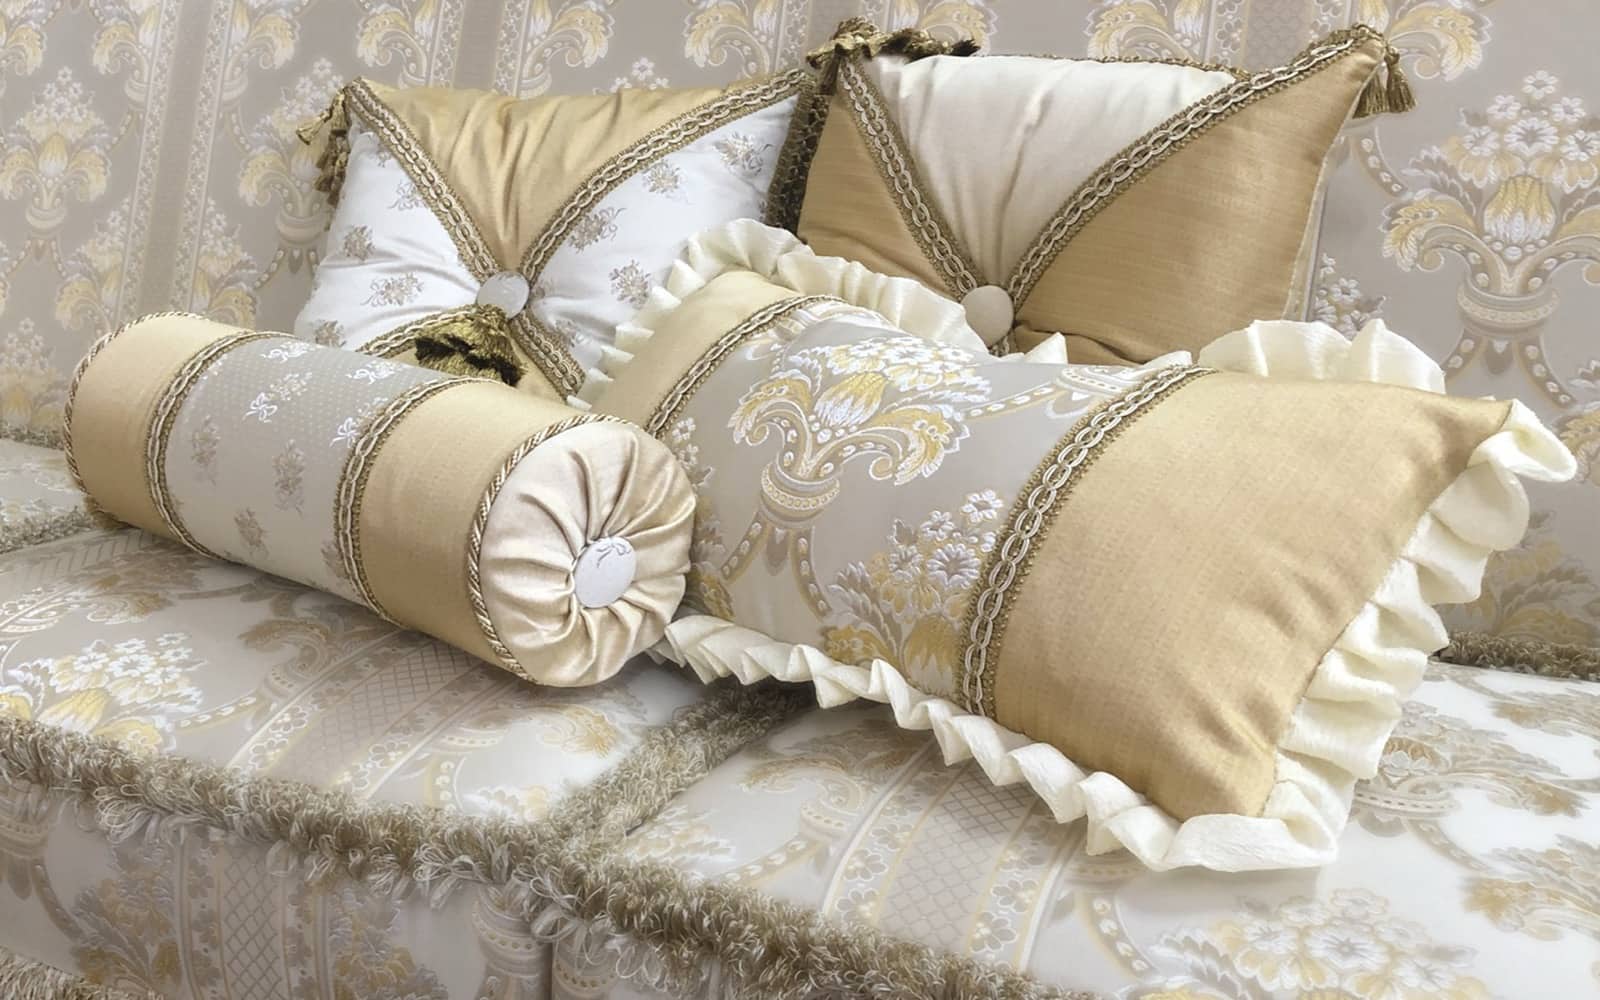 craftmanship handmade artisan best quality materials premium fabrics made in Italy sild elegant design pillows living room bedroom accessories upholstery precious pieces luxury home Italian ideas concepts home decoration